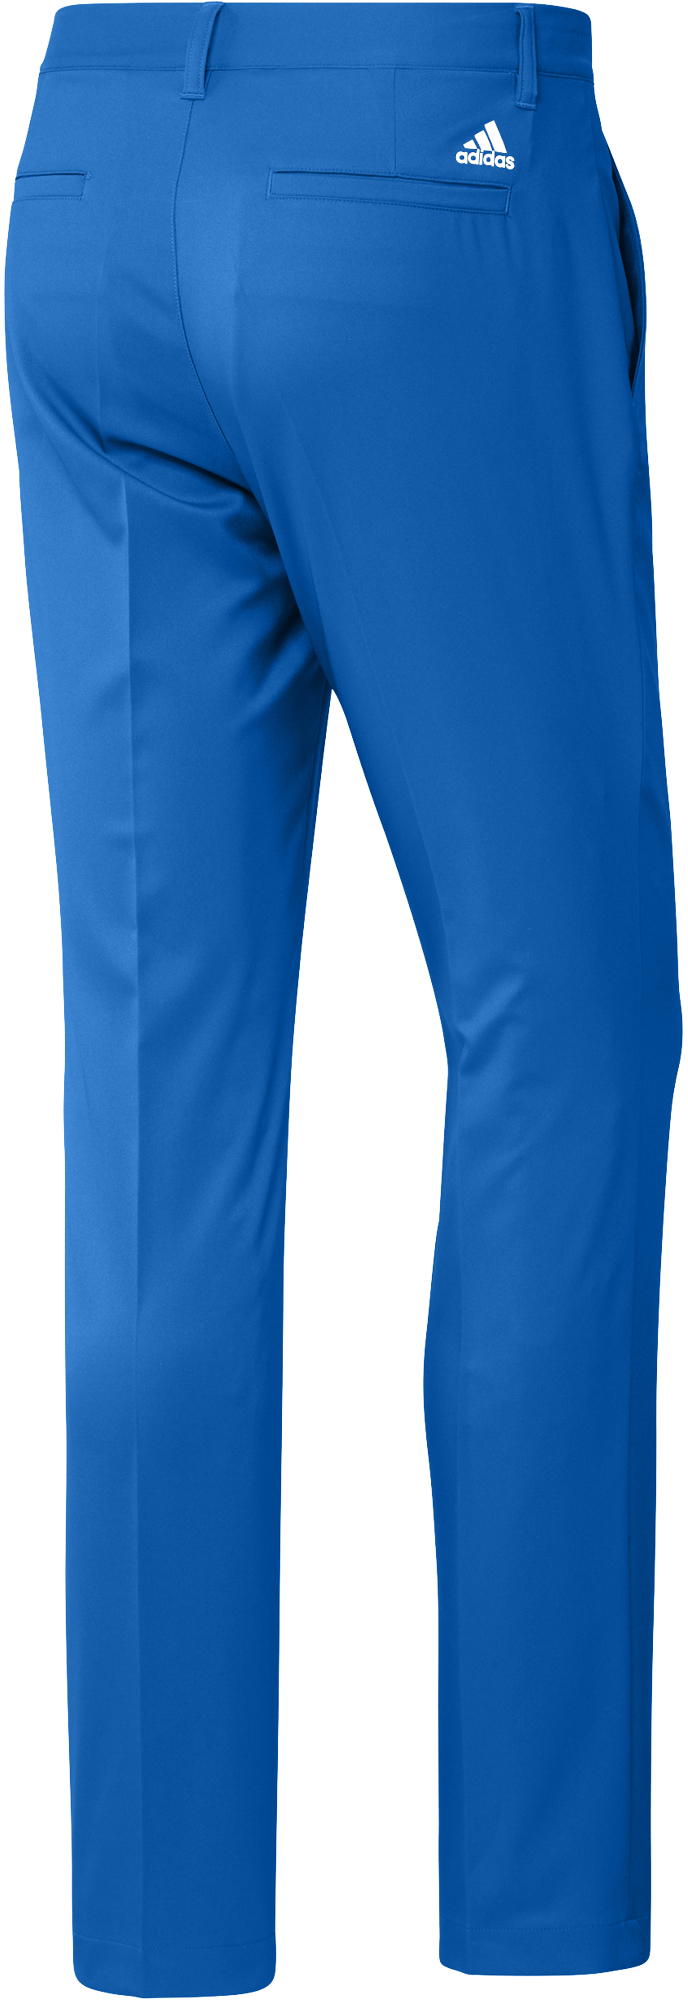 adidas Ultimate365 Primegreen Tapered Pant, blue